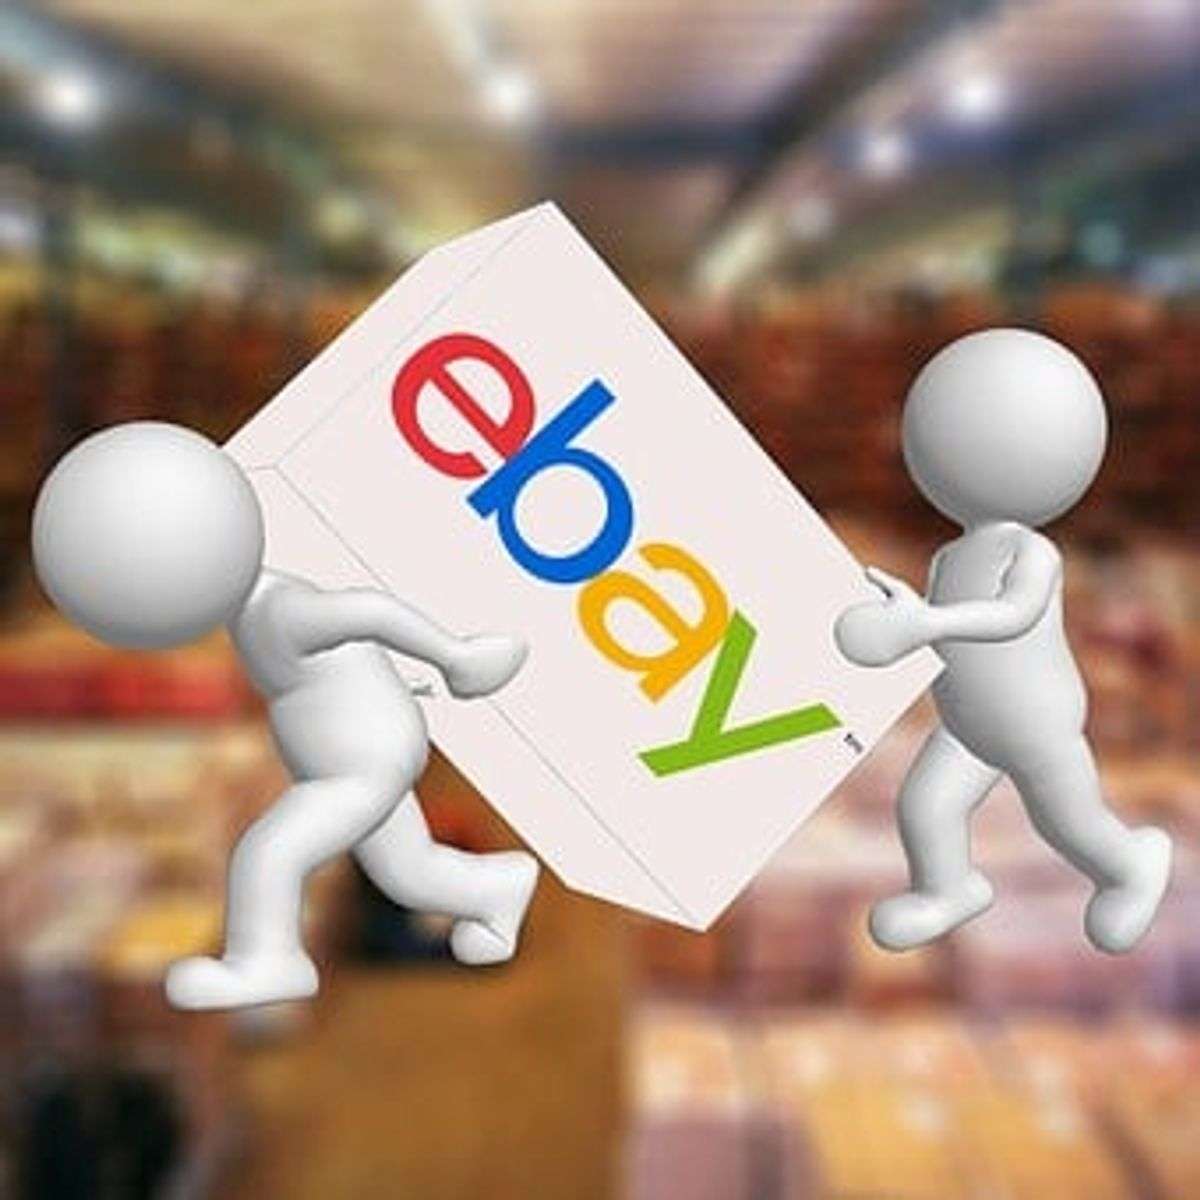 Quickly Become a Successful eBay Seller